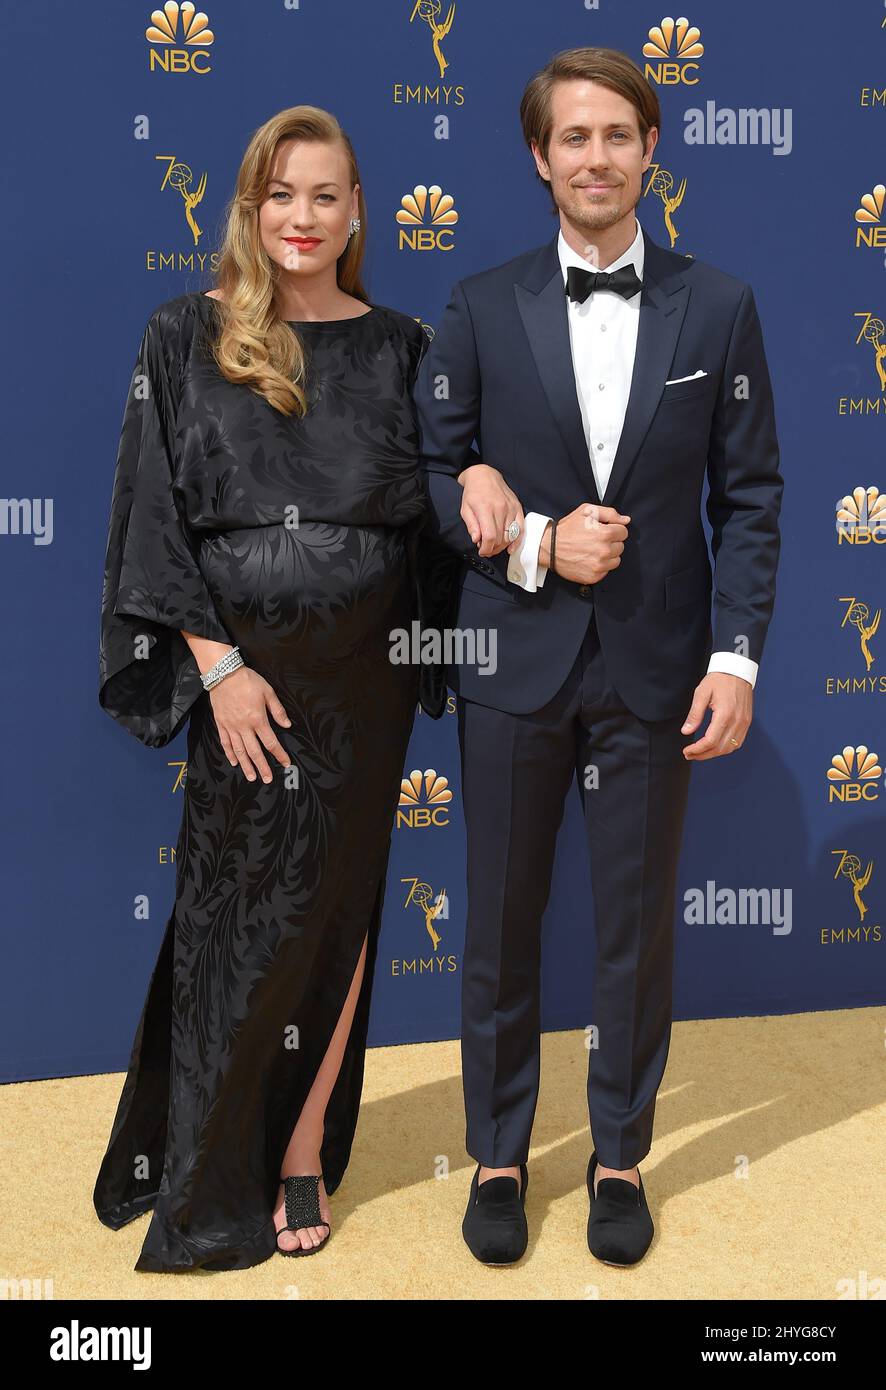 Yvonne Strahovski and Tim Loden at the 70th Primetime Emmy Awards held at Microsoft Theatre L.A. Live on September 17, 2018 in Los Angeles, USA Stock Photo